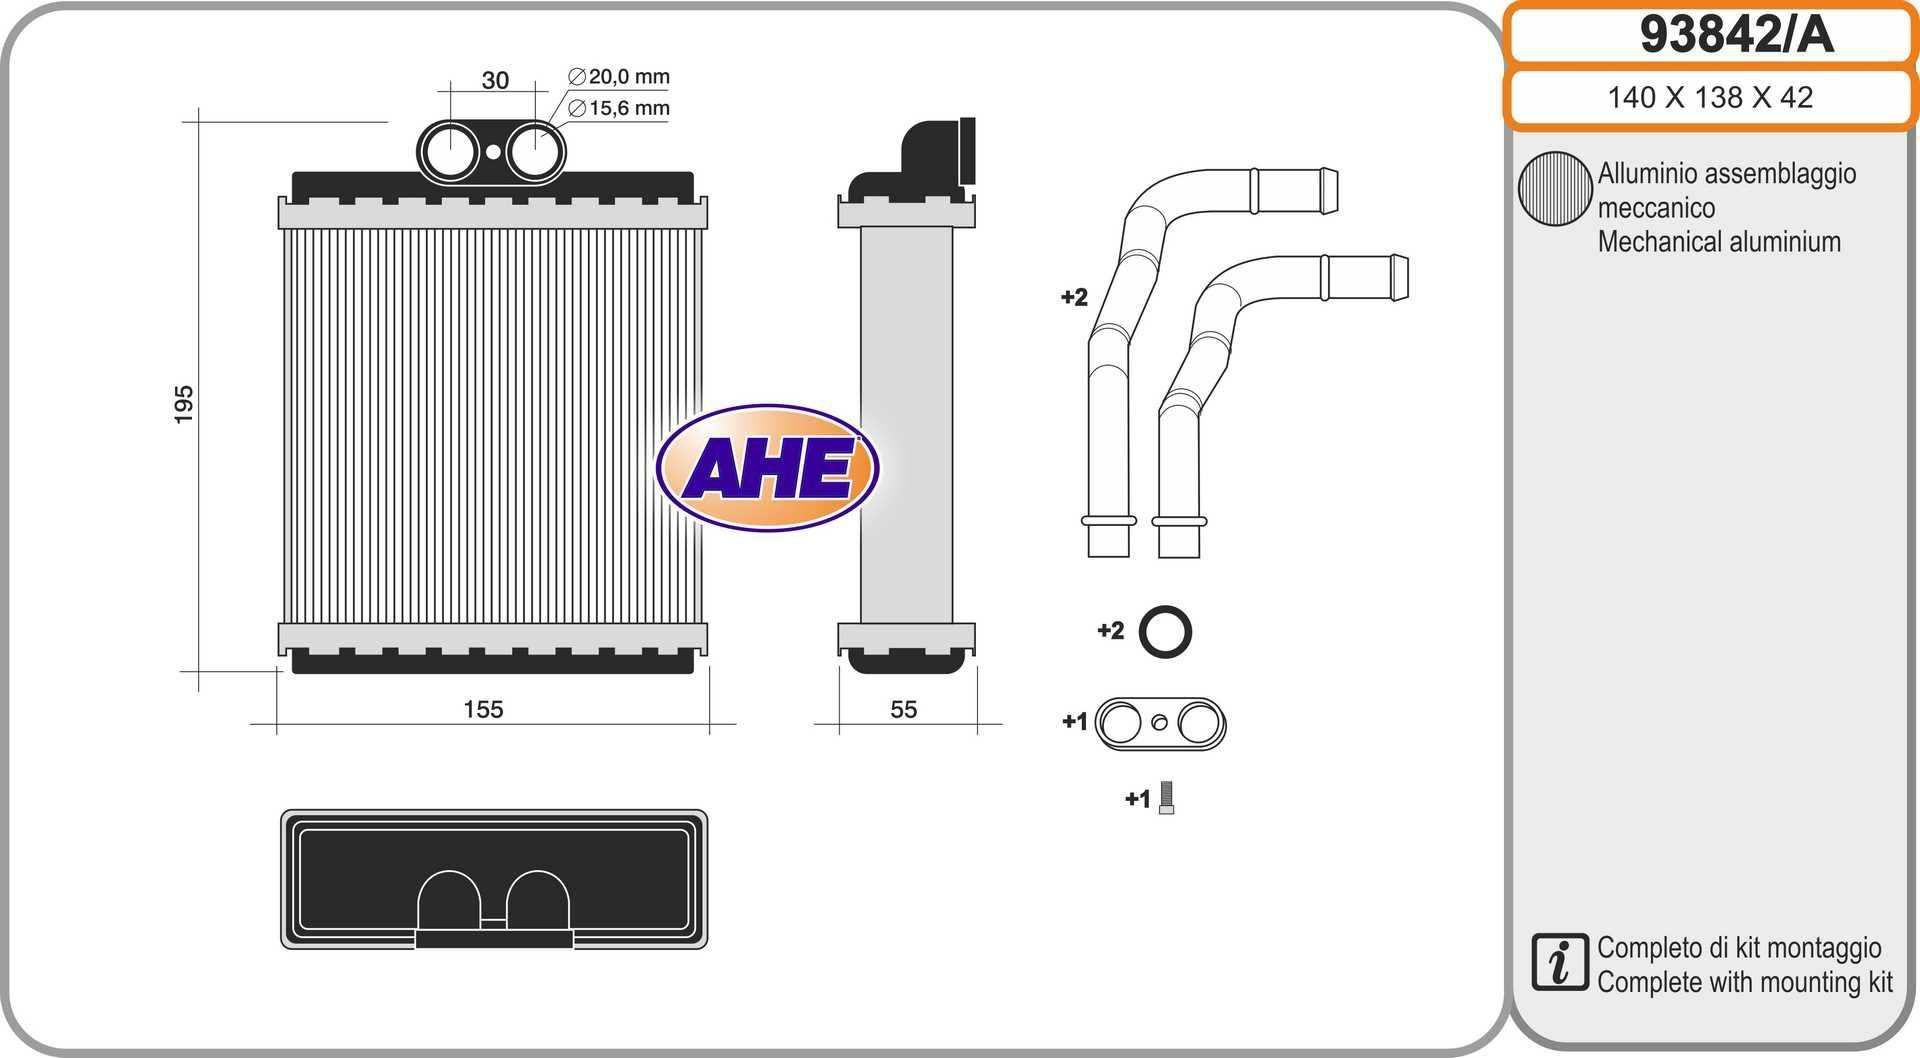 Original 93842/A AHE Heat exchanger experience and price